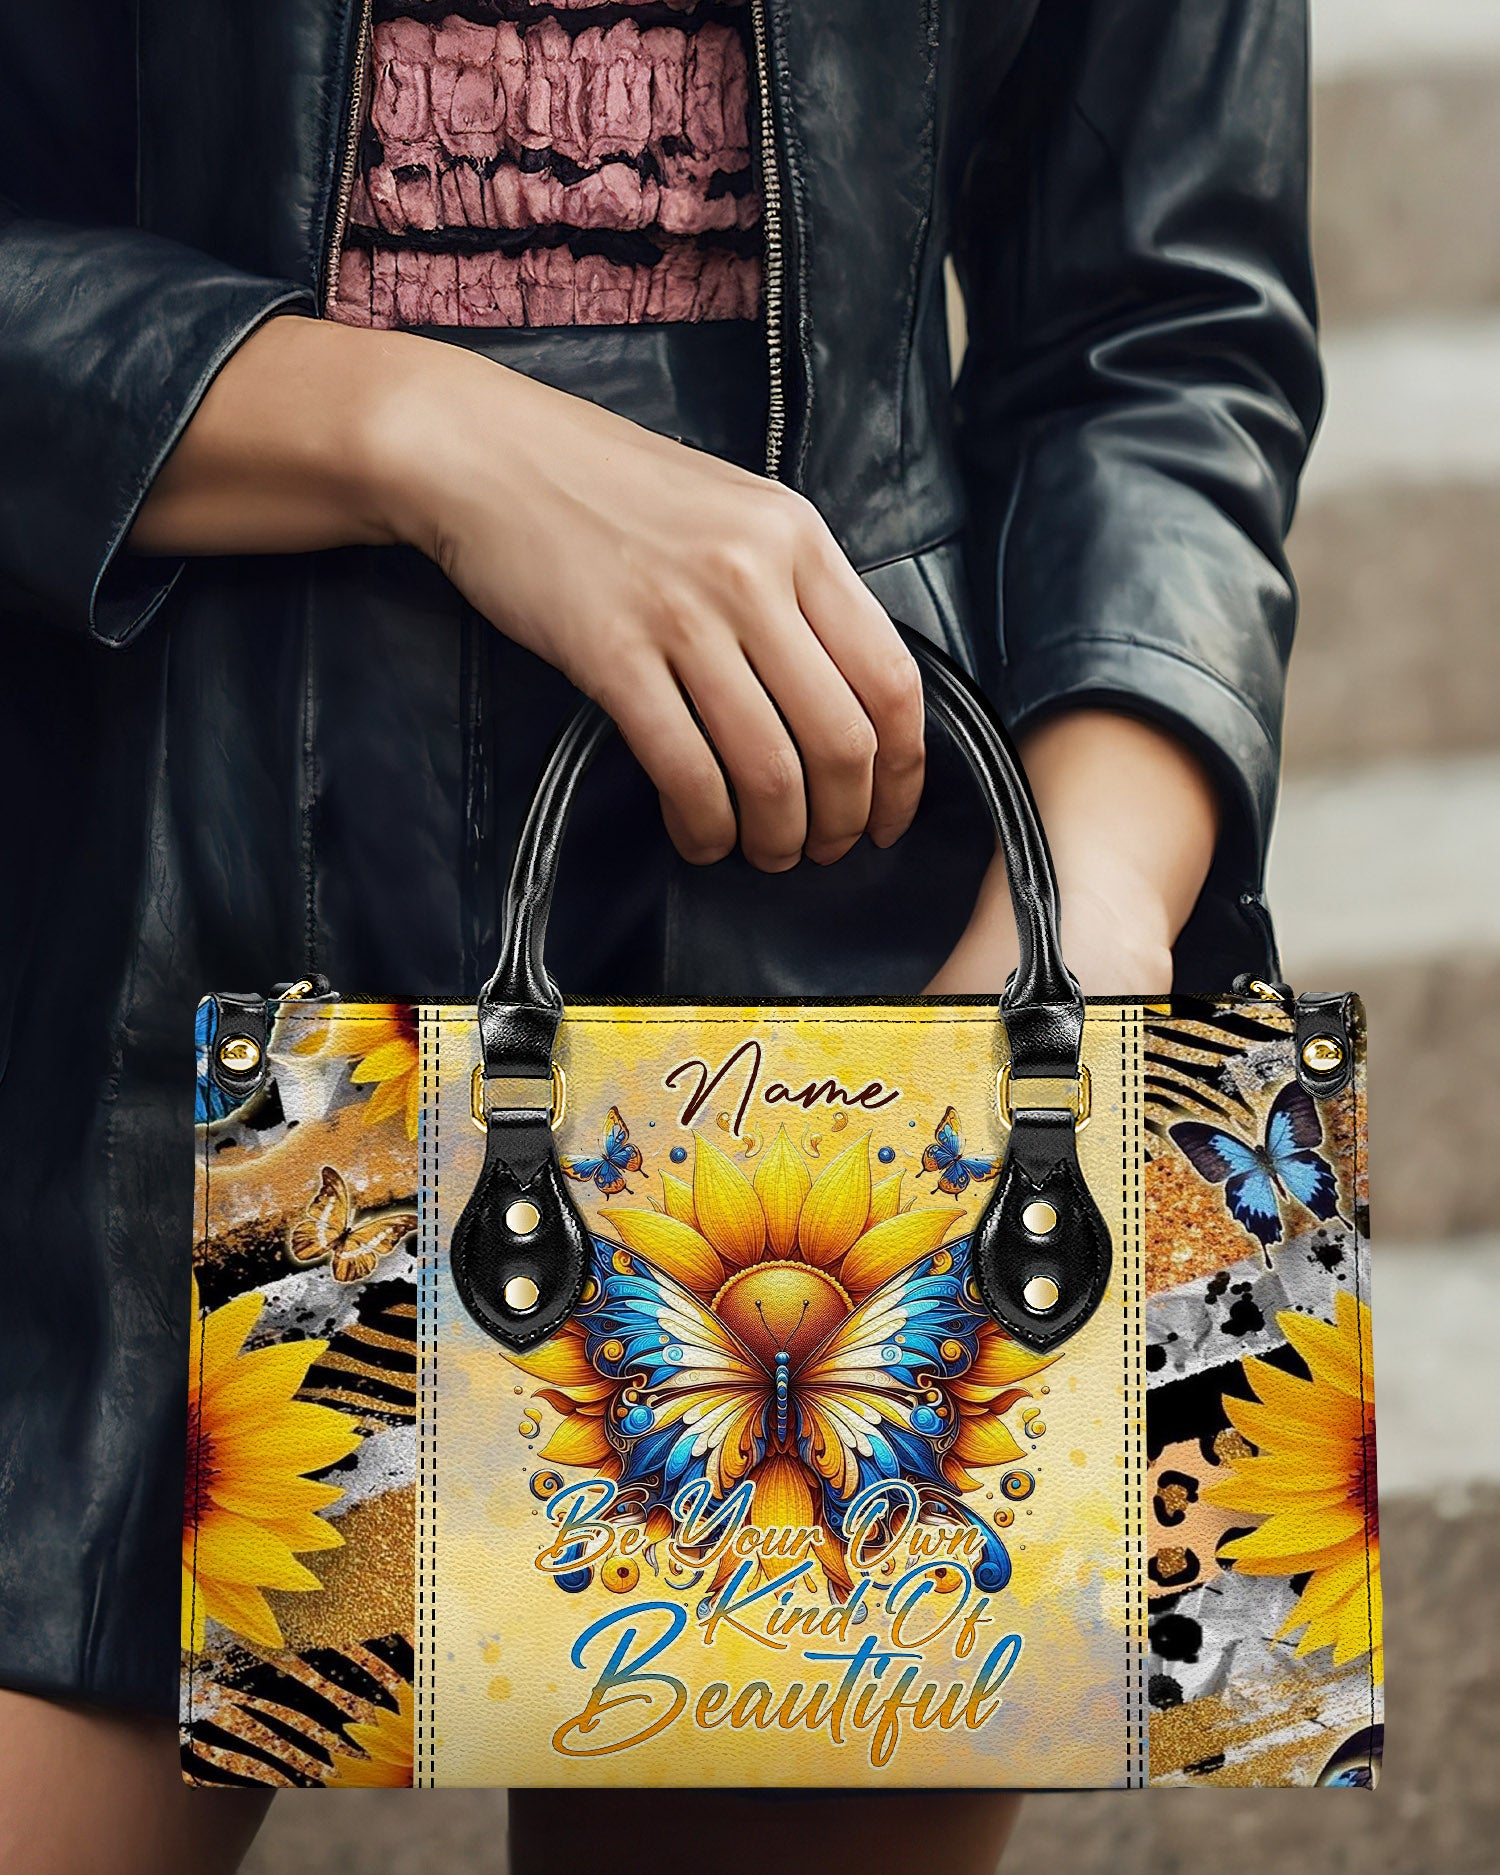 BE YOUR OWN KIND OF BEAUTIFUL BUTTERFLY SUNFLOWER LEATHER HANDBAG - TLNZ2603241